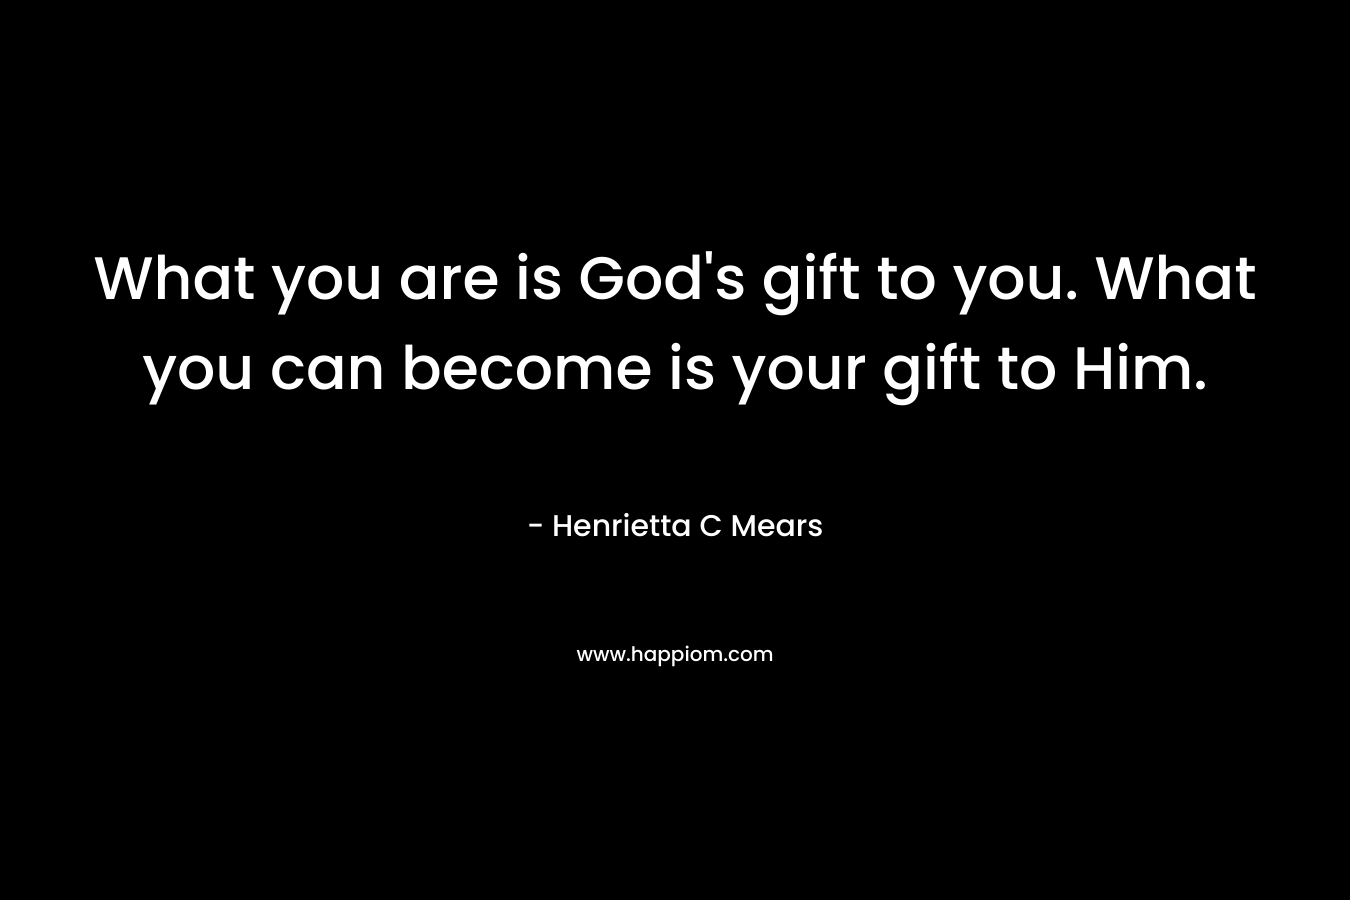 What you are is God's gift to you. What you can become is your gift to Him.